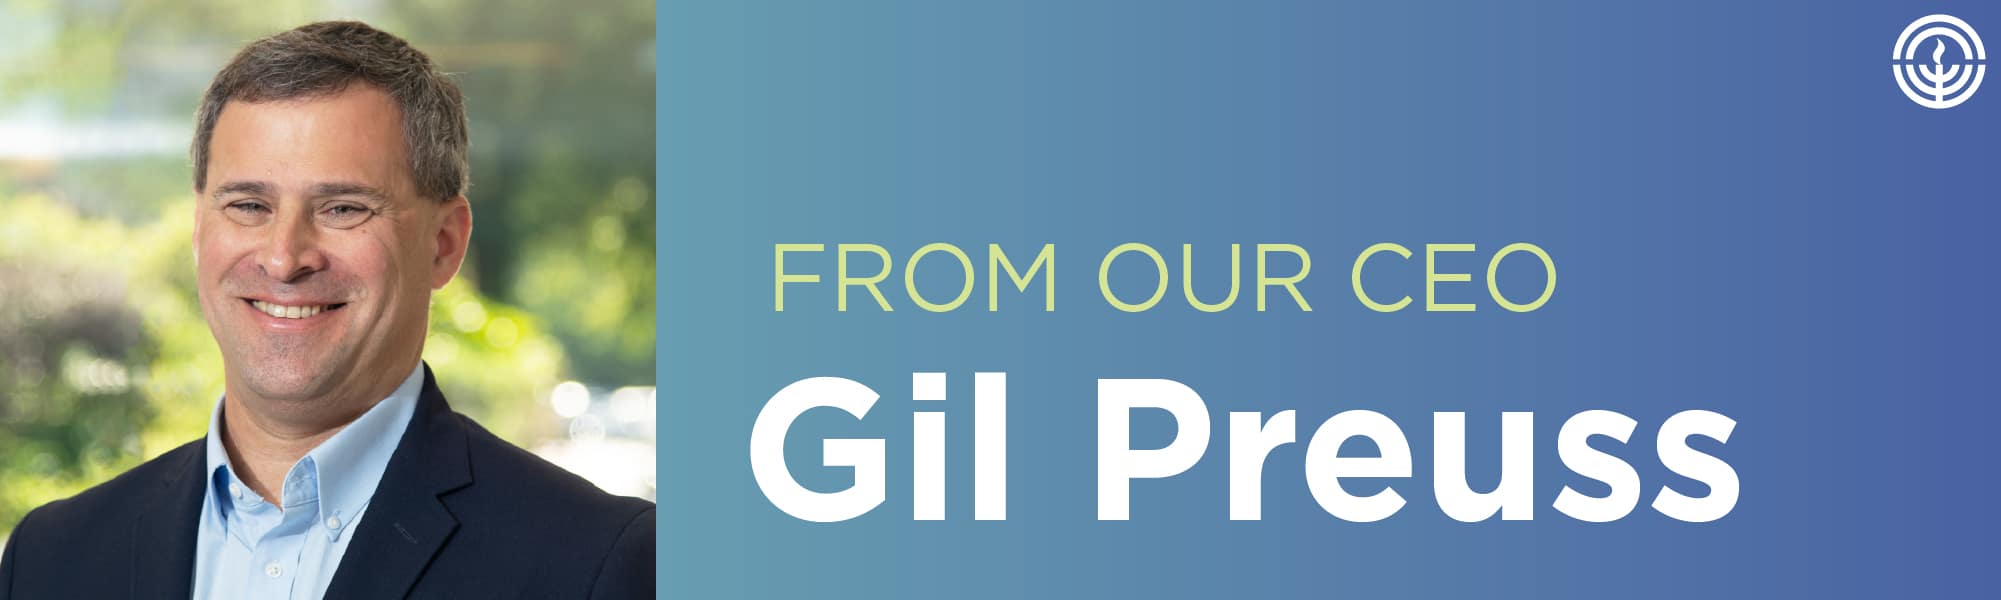 Weekly Reflection – October 23, 2020: A Message from Gil Preuss